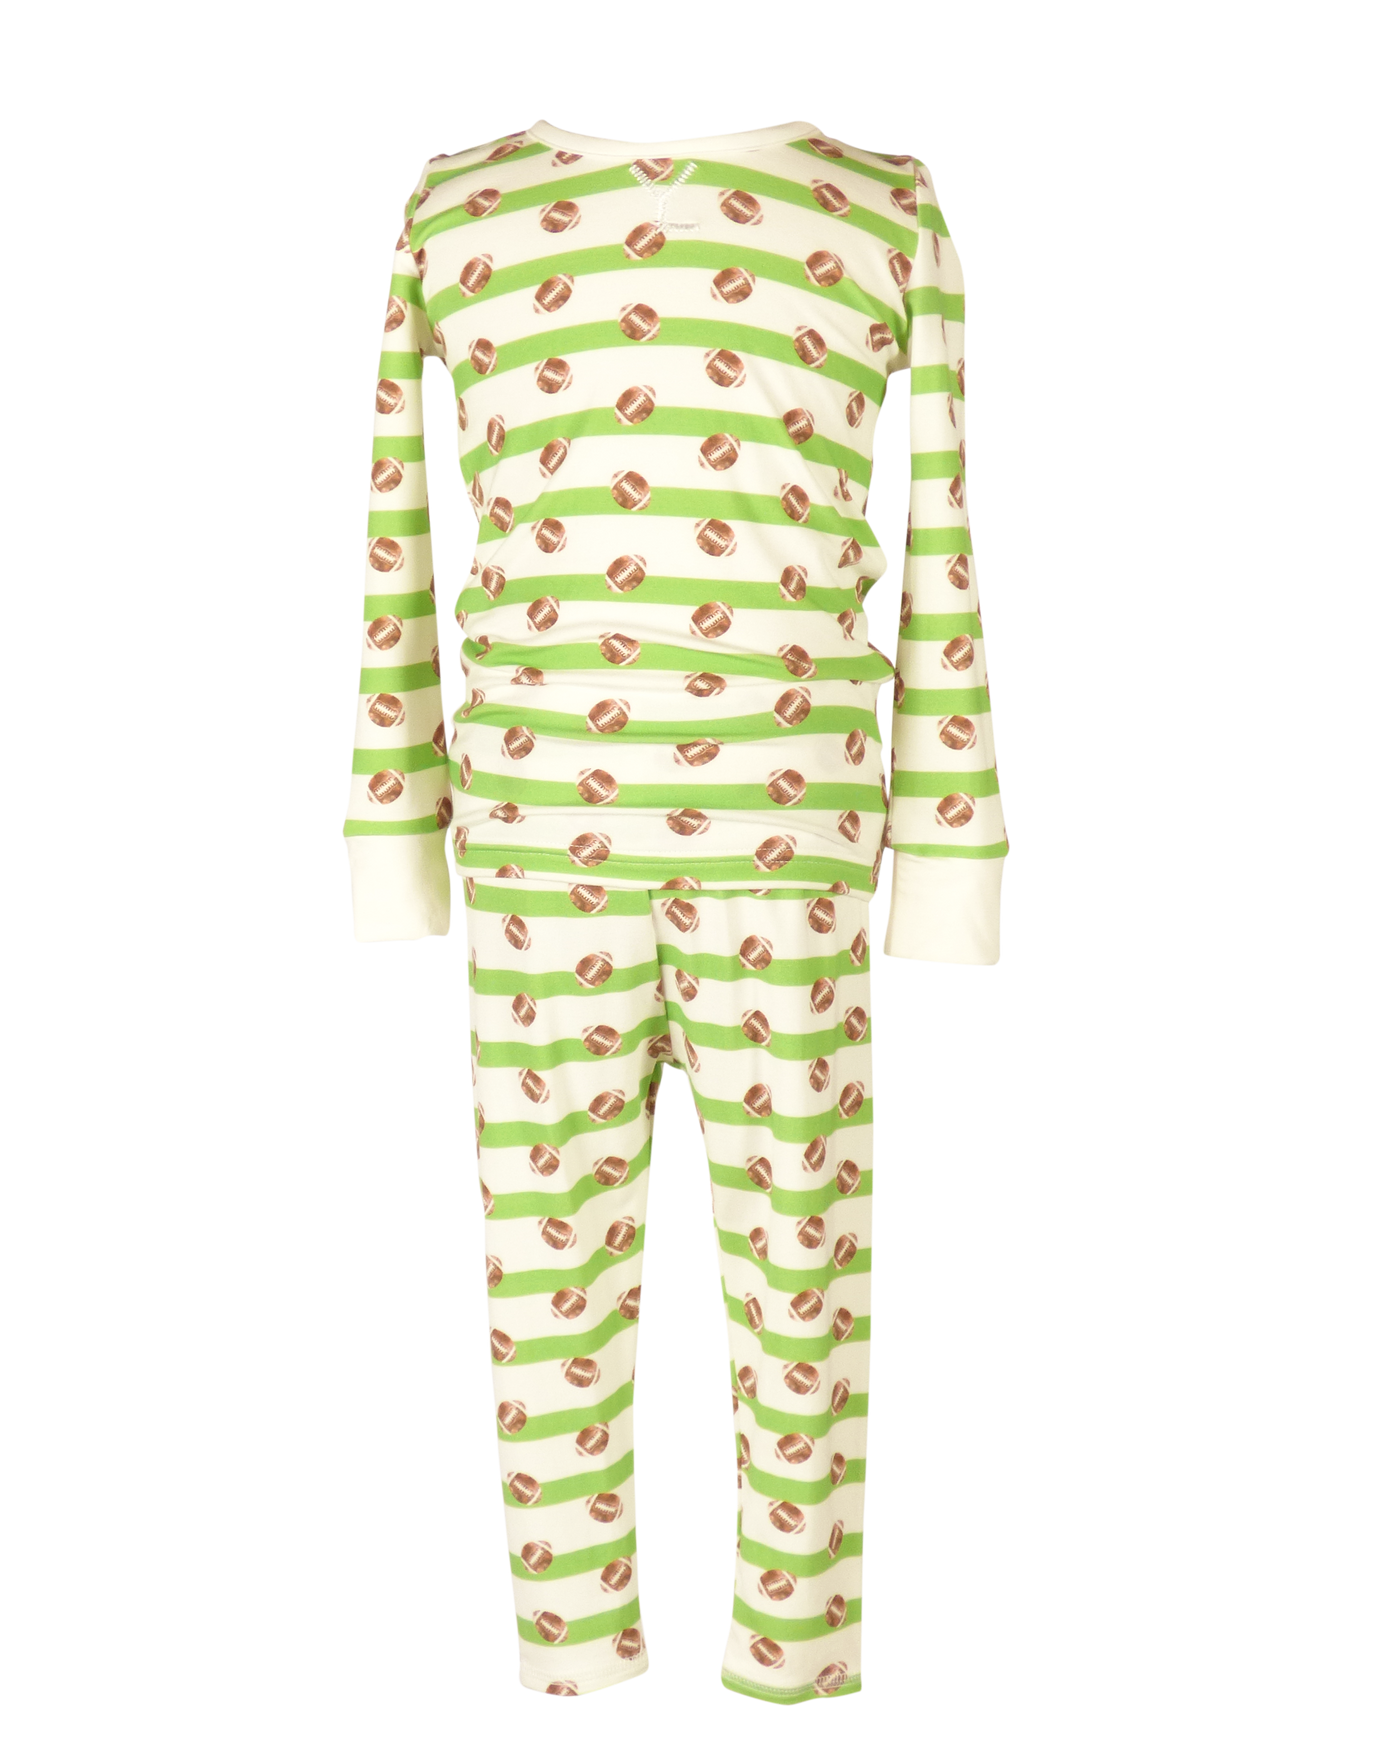 Game Day Green Lambie Jammies